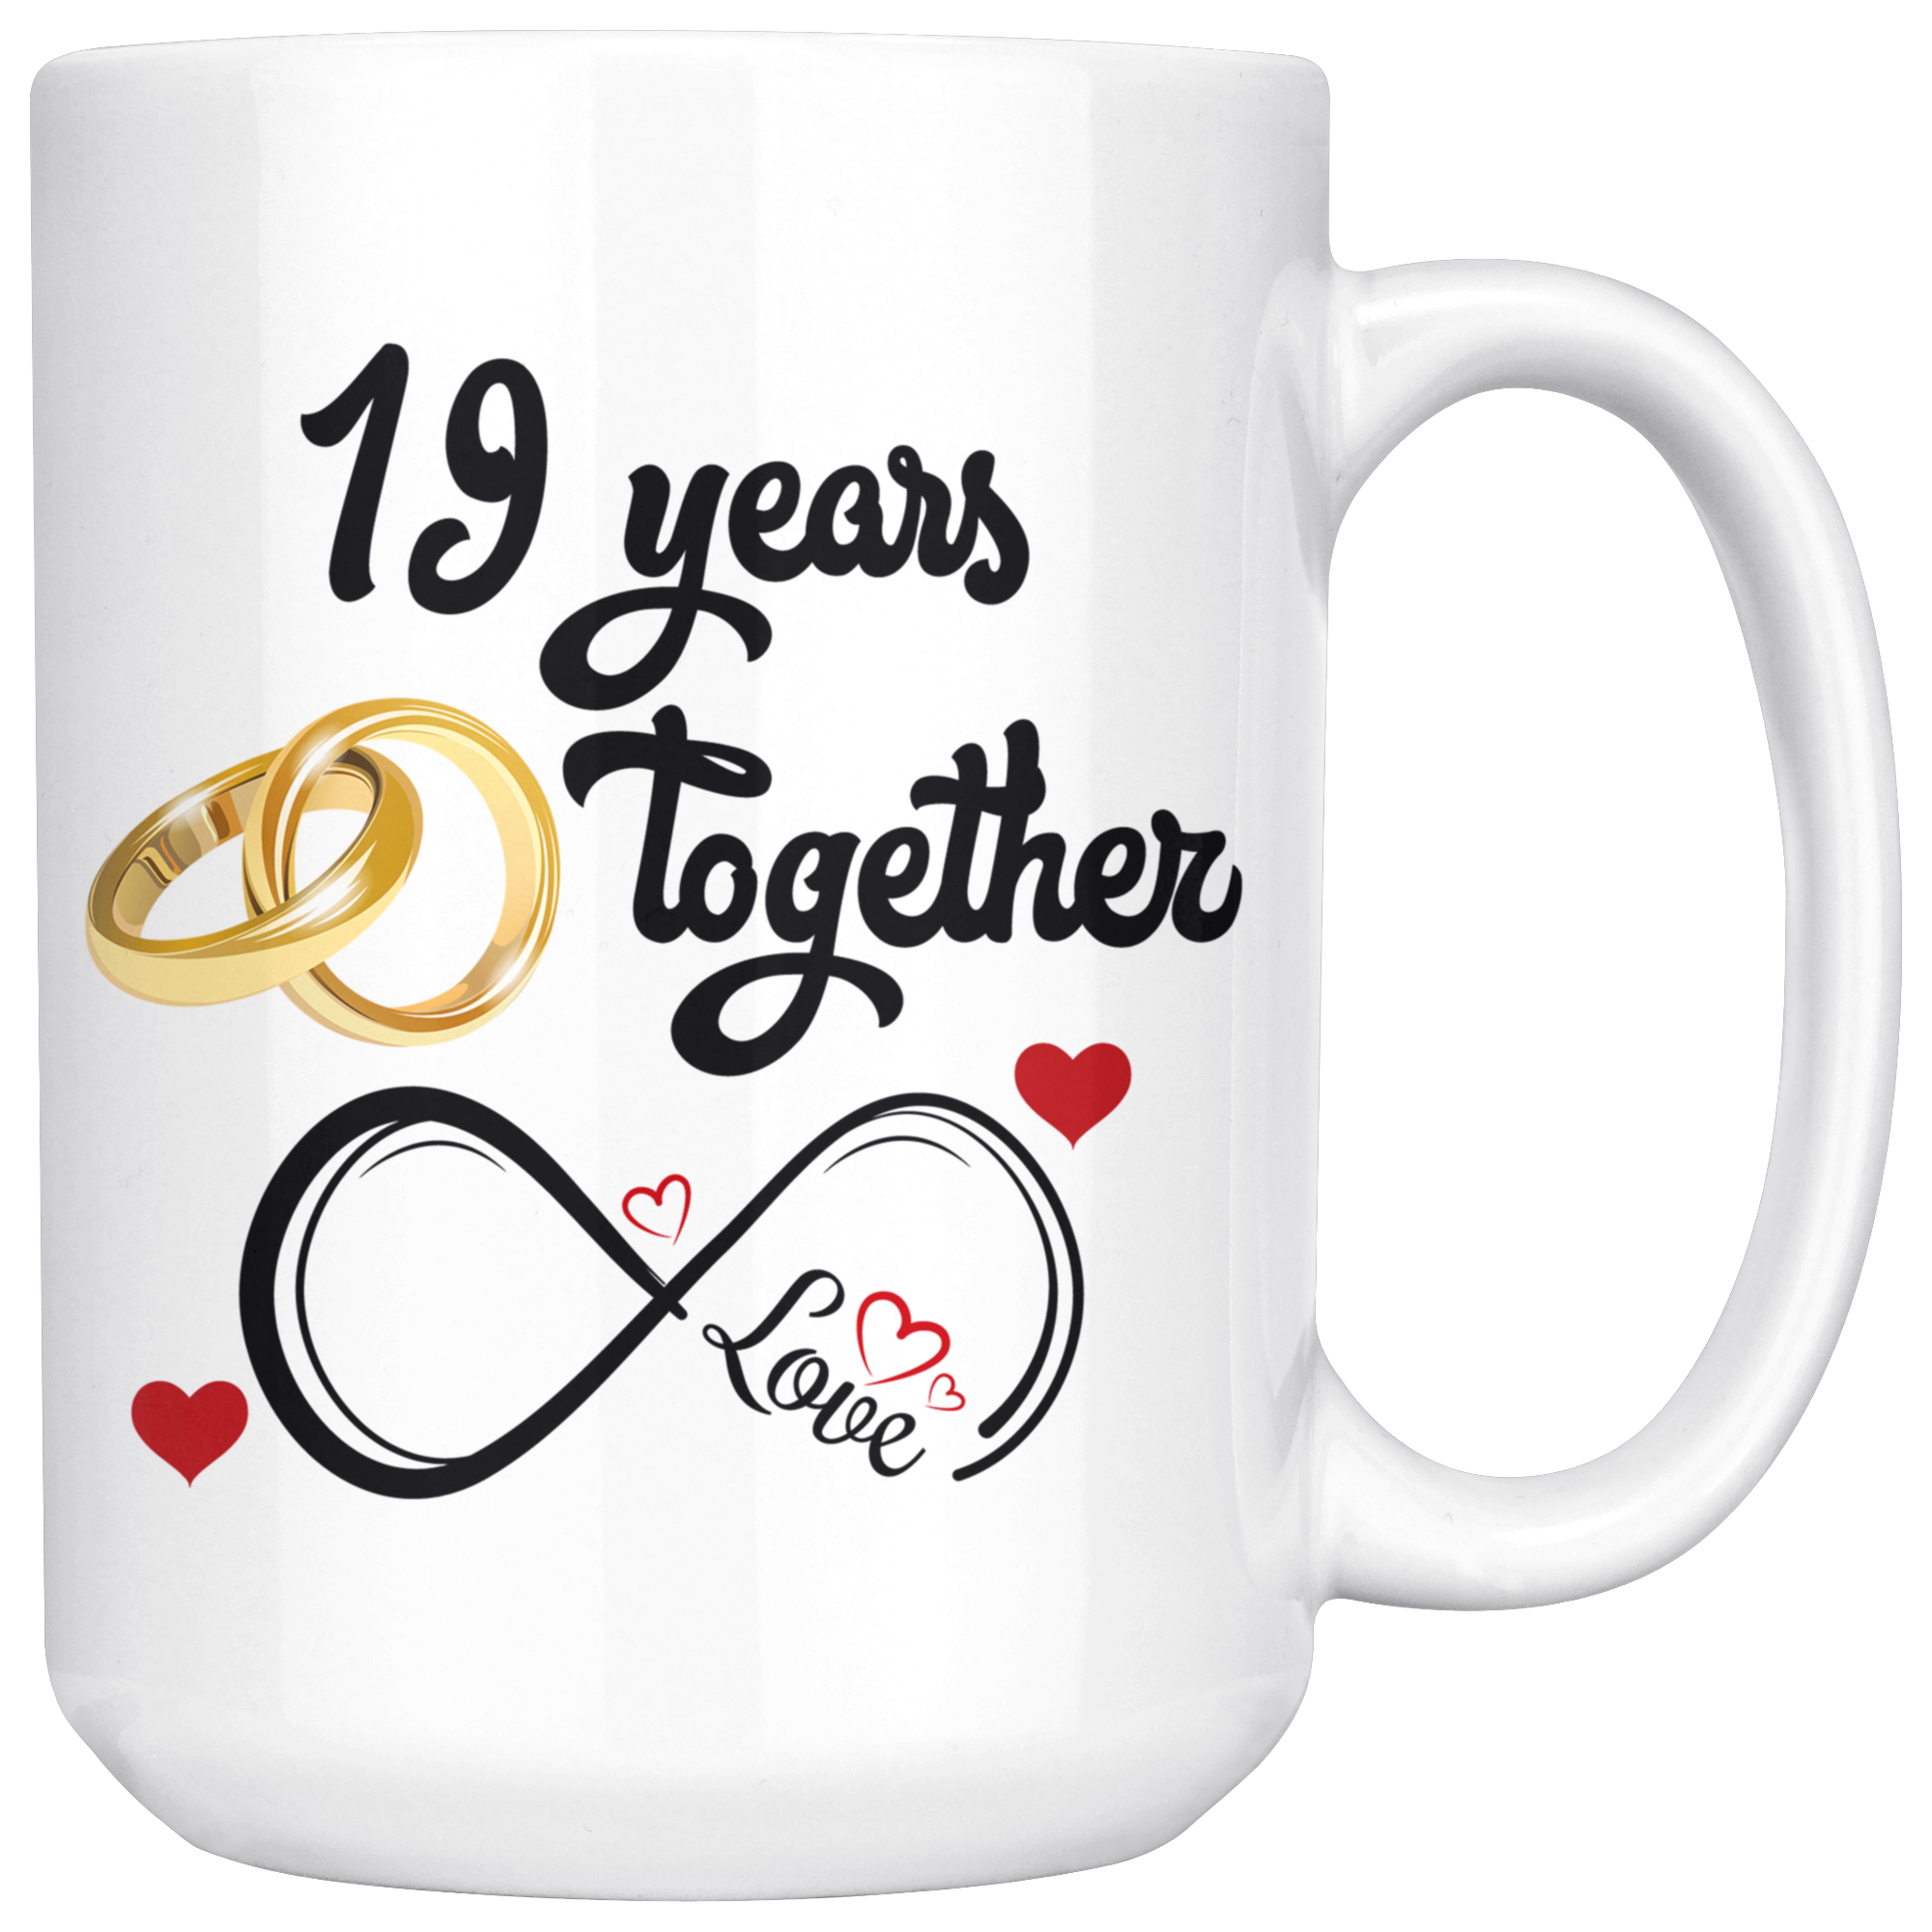 It's Our 19TH Anniversary: 19th wedding anniversary gifts for couples | 19  year anniversary gift for Husband, Wife | Notebook Journal 6x9 Inches 100  Pages | 19th anniversary gift for him, her: